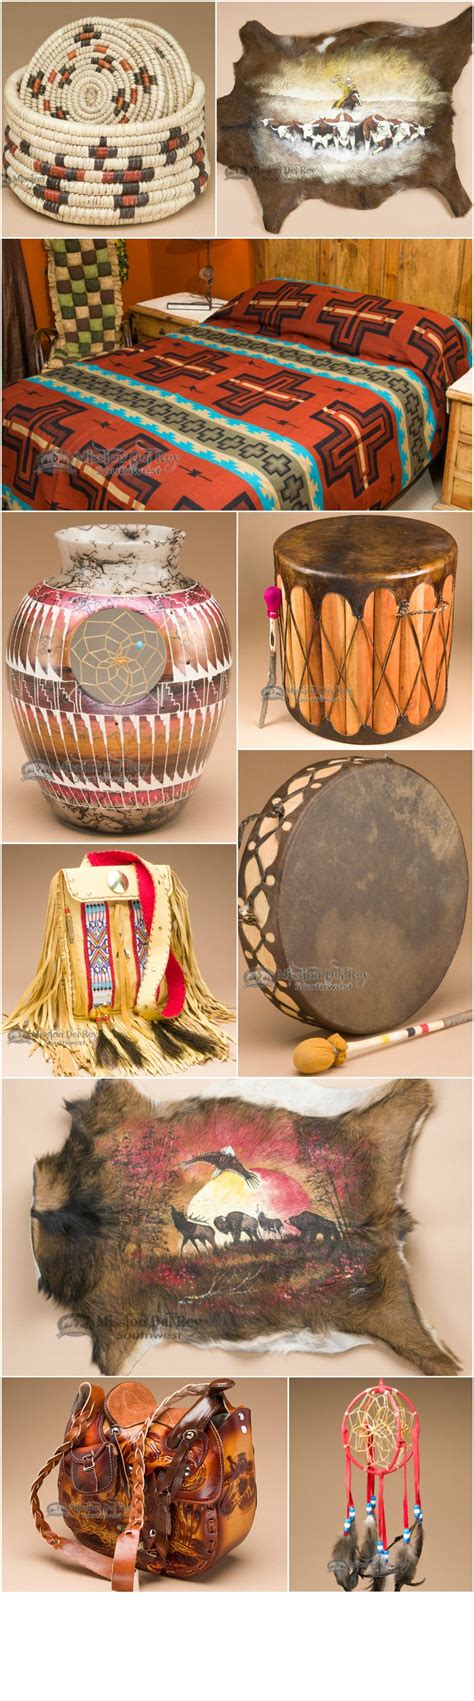 Get the best deals on native american home décor. Find amazing southwest, western, Native American and ...